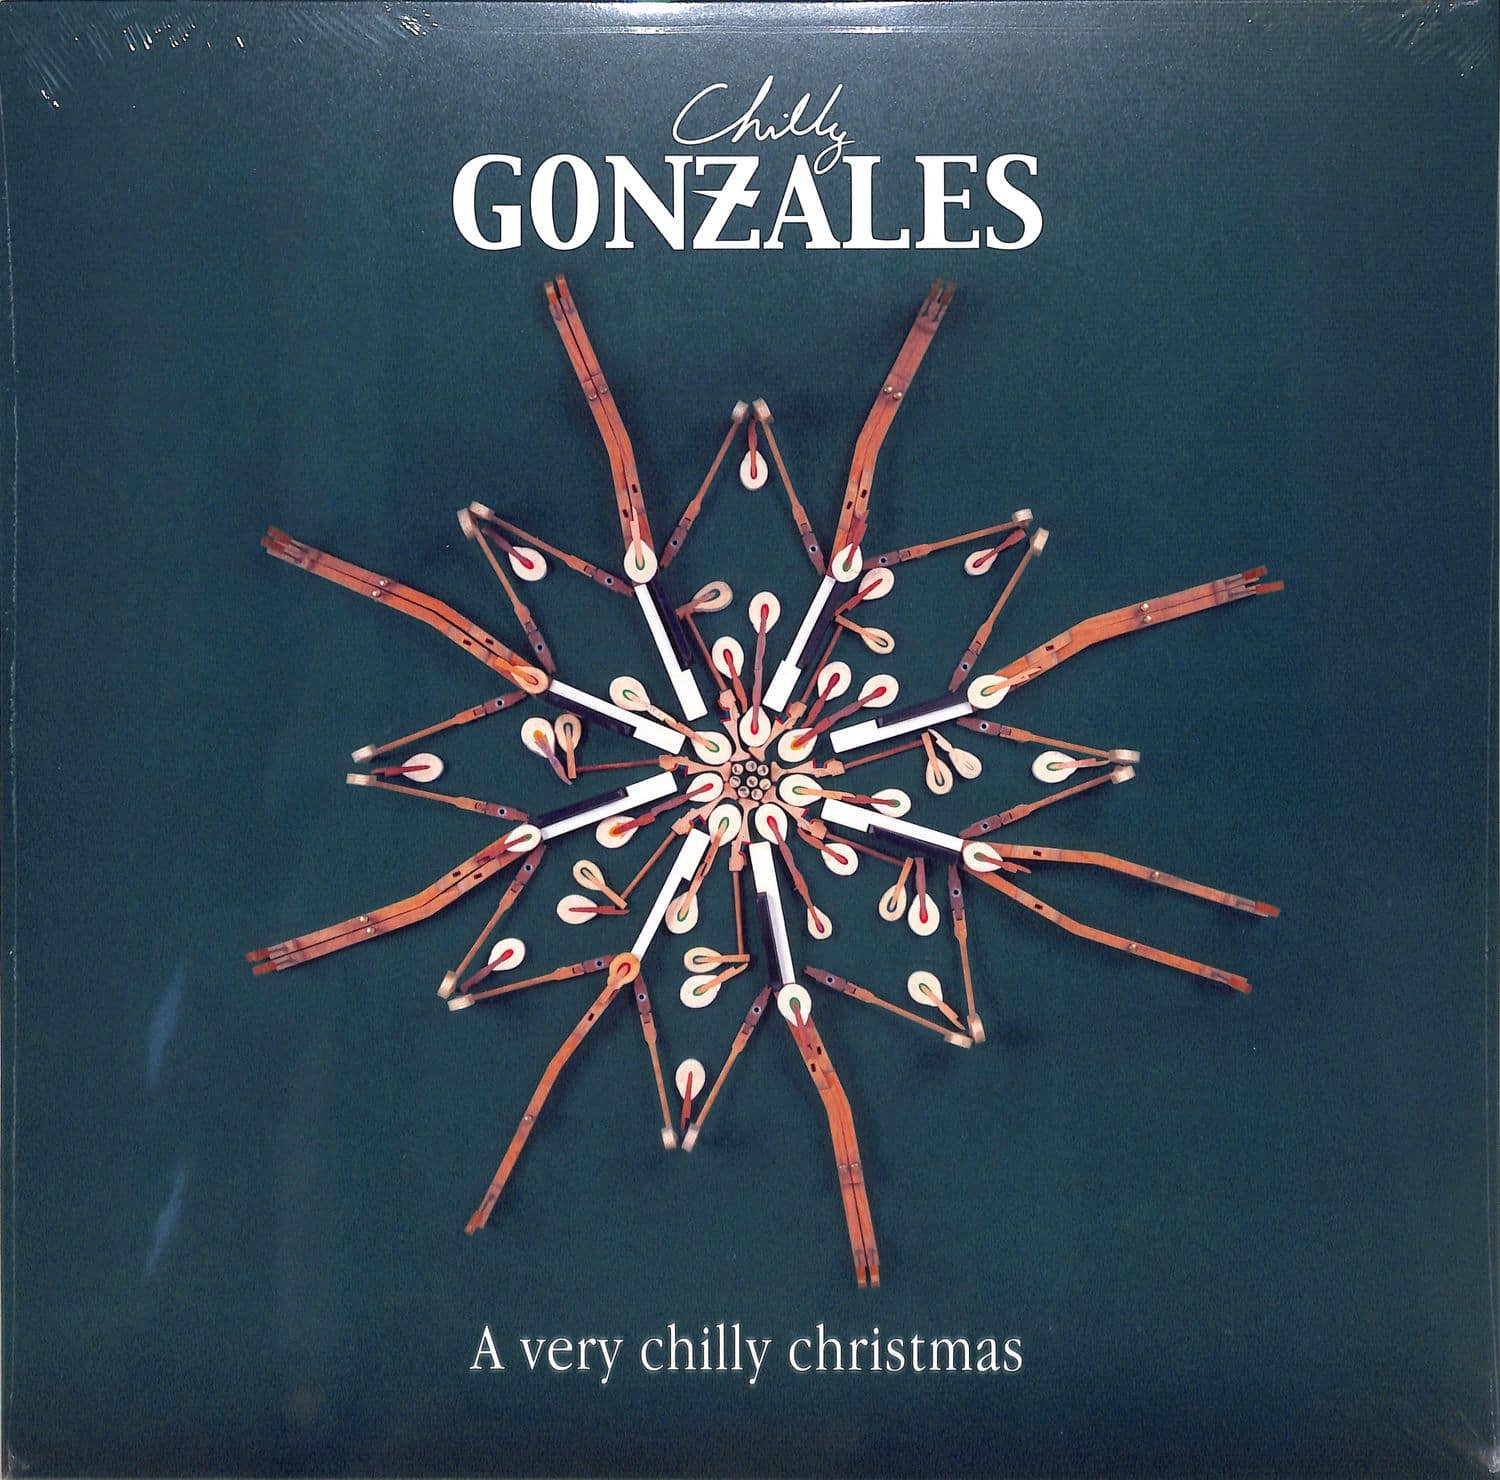 Chilly Gonzales - A VERY CHILLY CHRISTMAS 